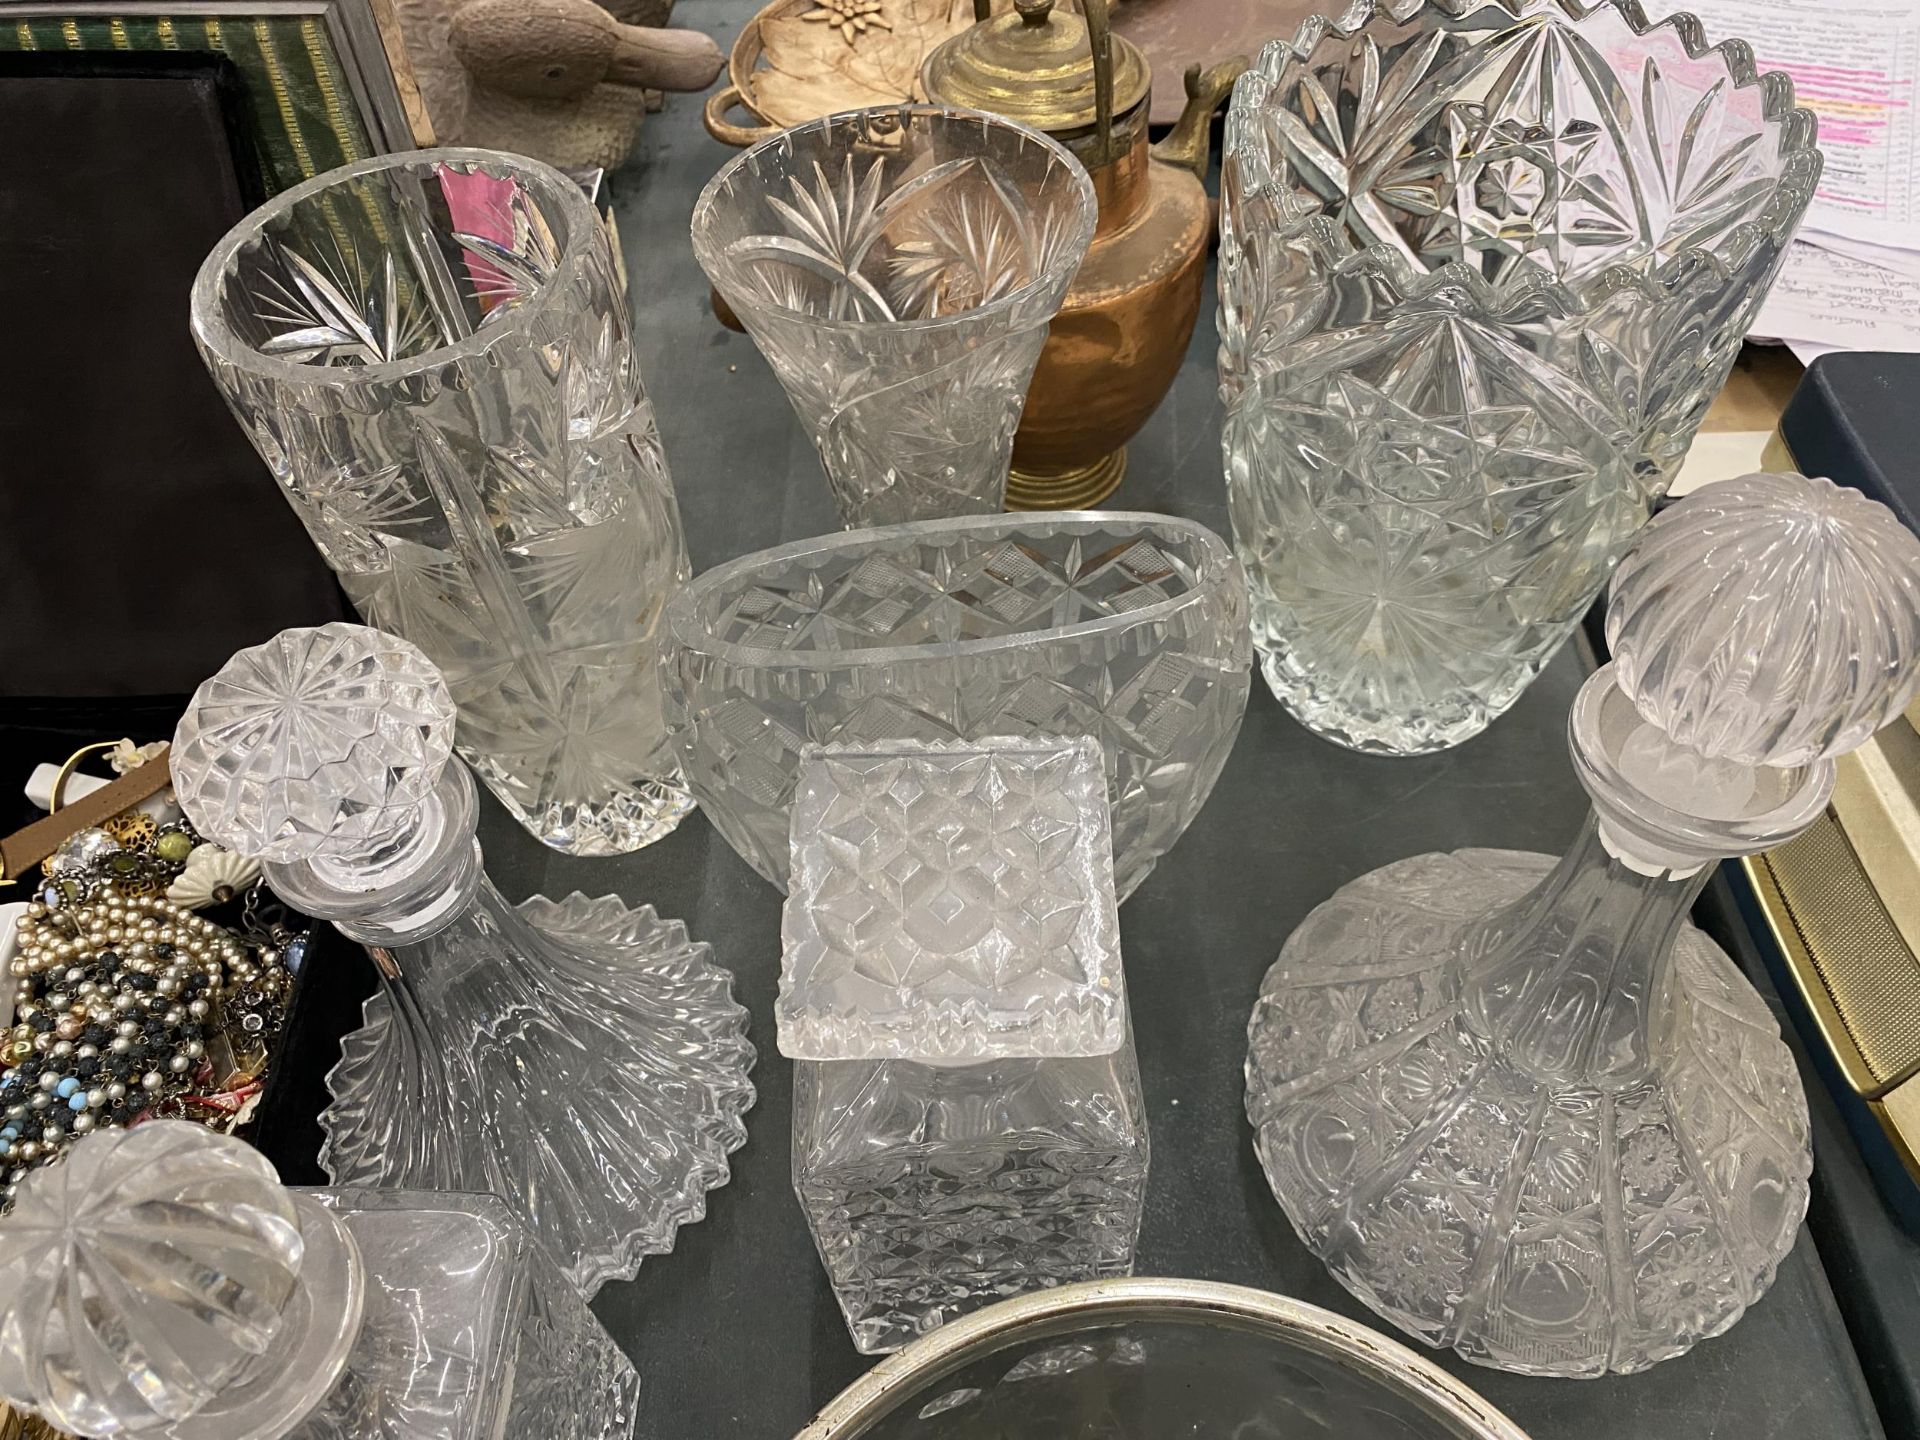 A LARGE QUANTITY OF GLASSWARE TO INCLUDE DECANTERS, VASES, BOWLS, ETC - 21 PIECES IN TOTAL - Image 4 of 4